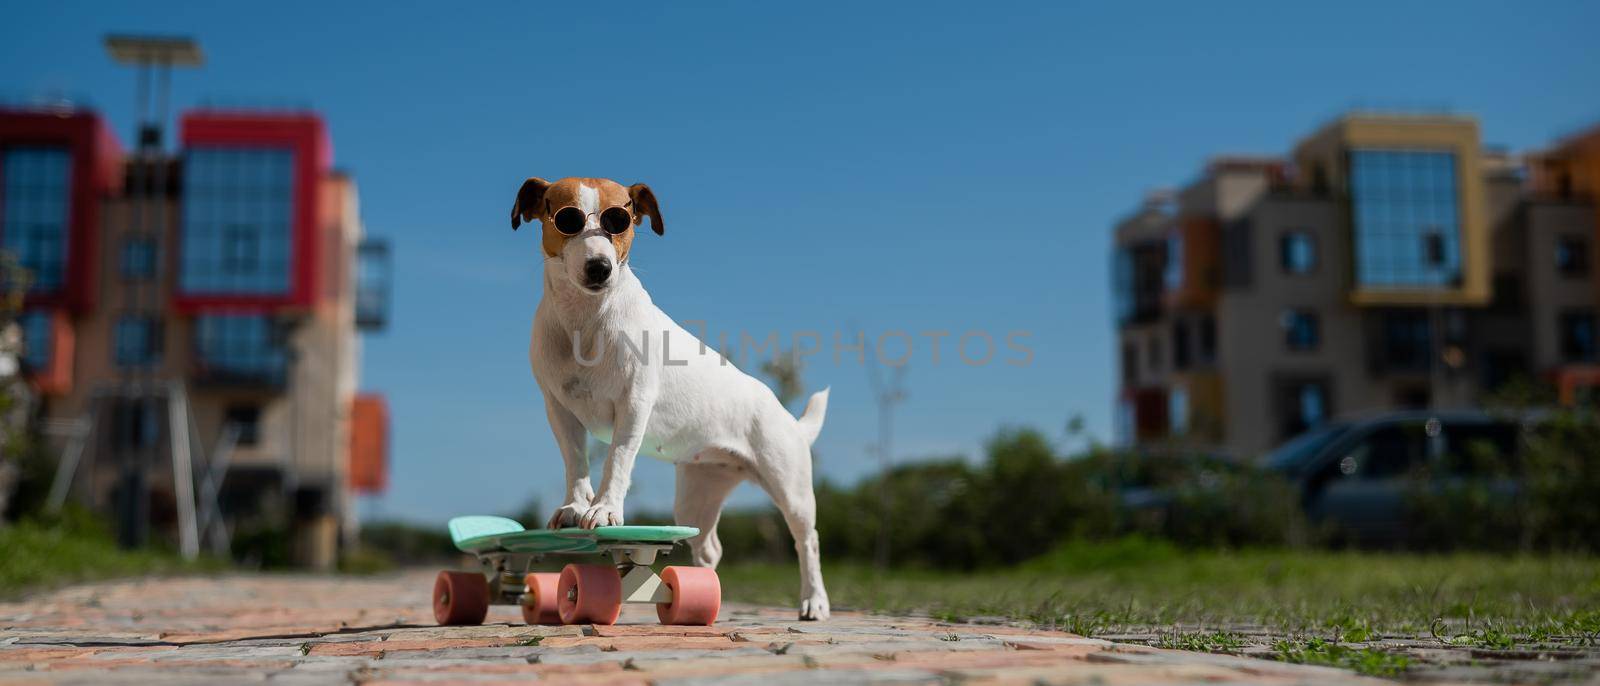 Jack russell terrier dog in sunglasses rides a penny board outdoors. by mrwed54